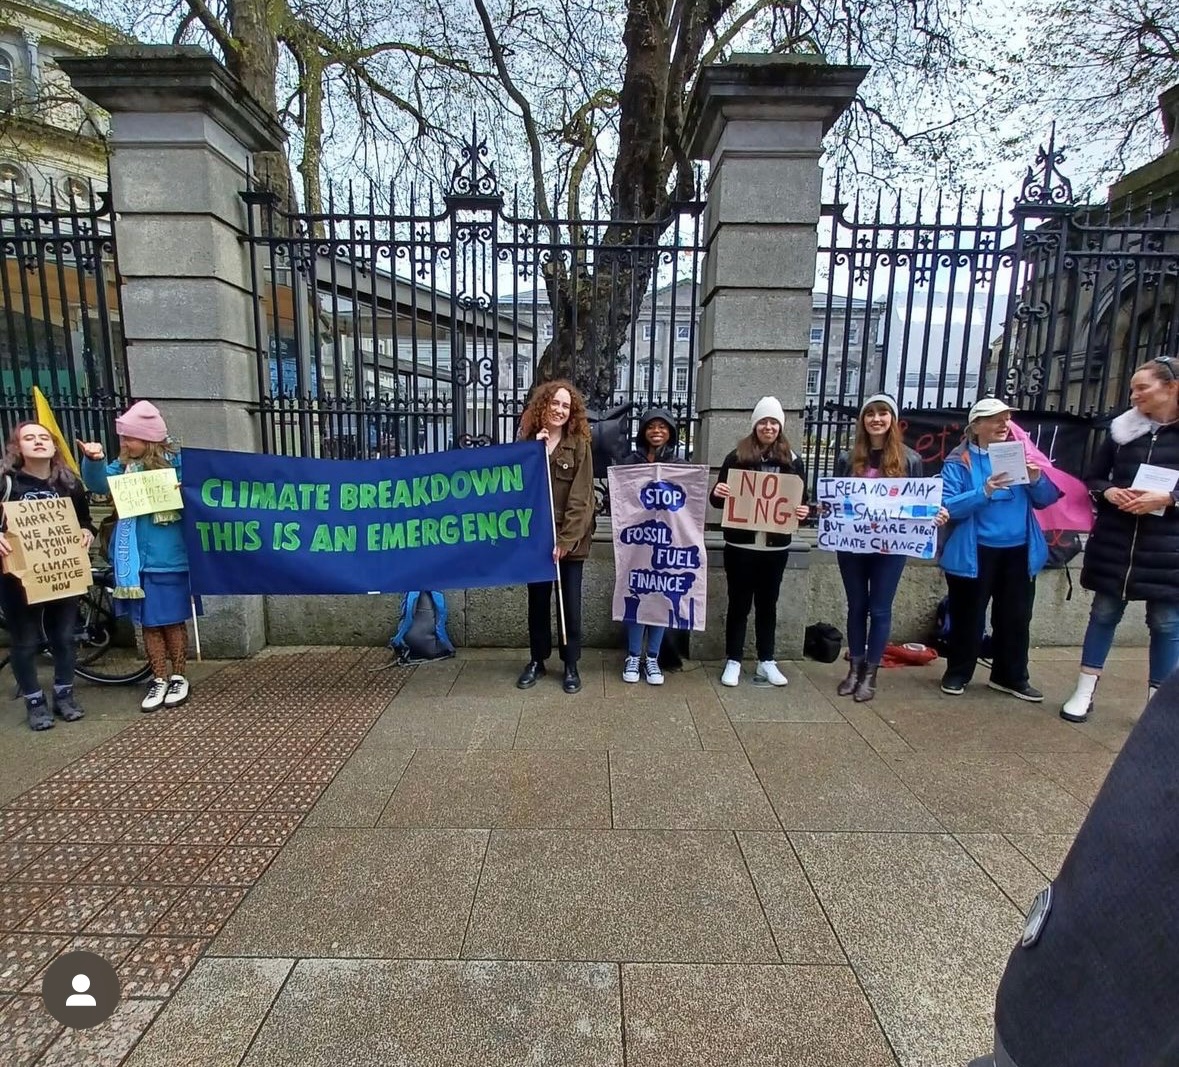 Week 293 #climatestrike Today was the Global Climate Strike…Back in 2019 we had a climate strike with twelve thousand people in Dublin today in 2024 we were pushing maybe 30 #climatechange #schoolstrike4climate #peoplenotprofit @GretaThunberg @SchoolStrikesIE @Fridays4future